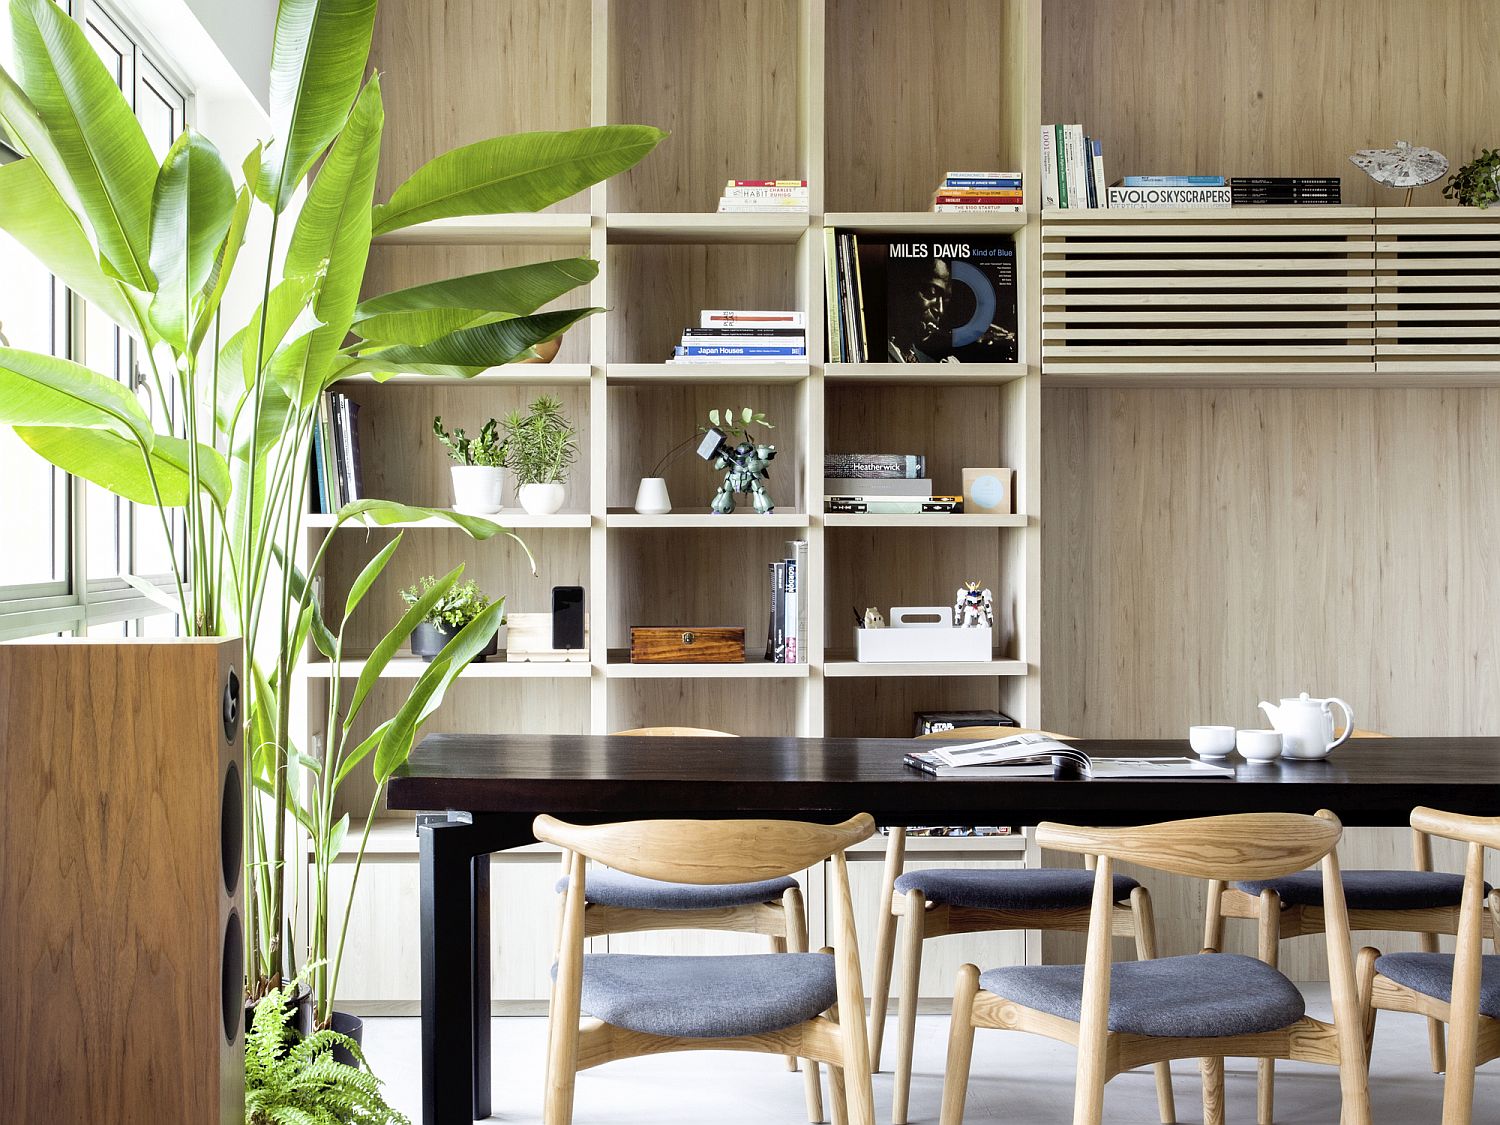 Wooden-partitions-and-shelving-inside-the-apartment